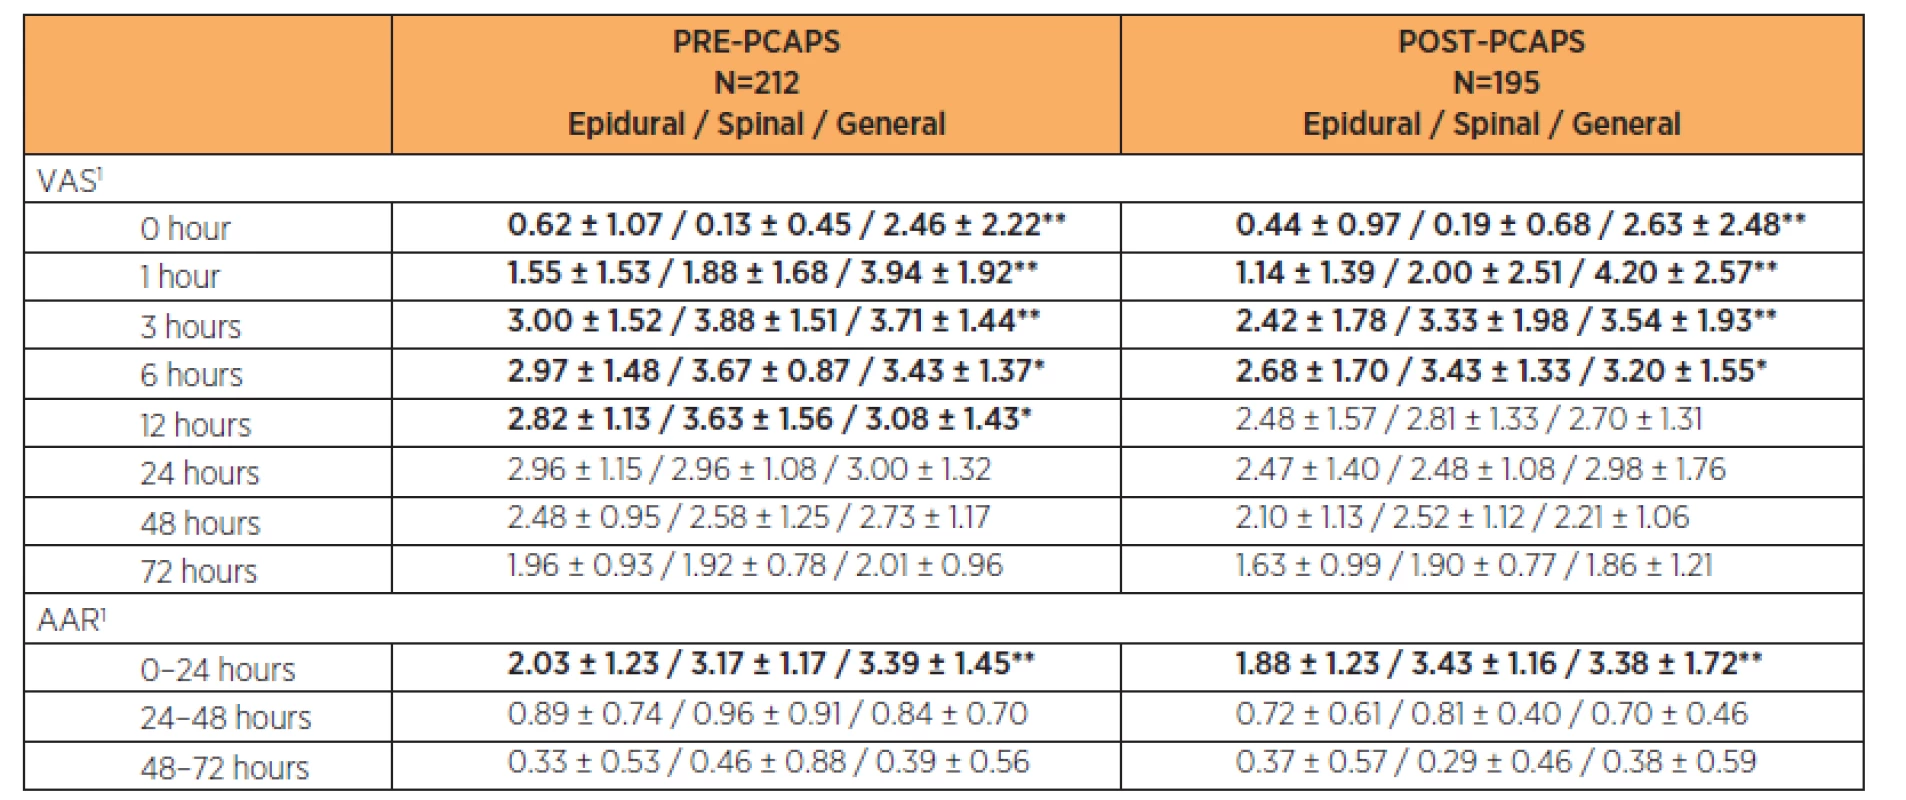 Comparison of VAS and ARR in PRE-PCAPS and POST-PCAPS groups according to the type of anaesthesia